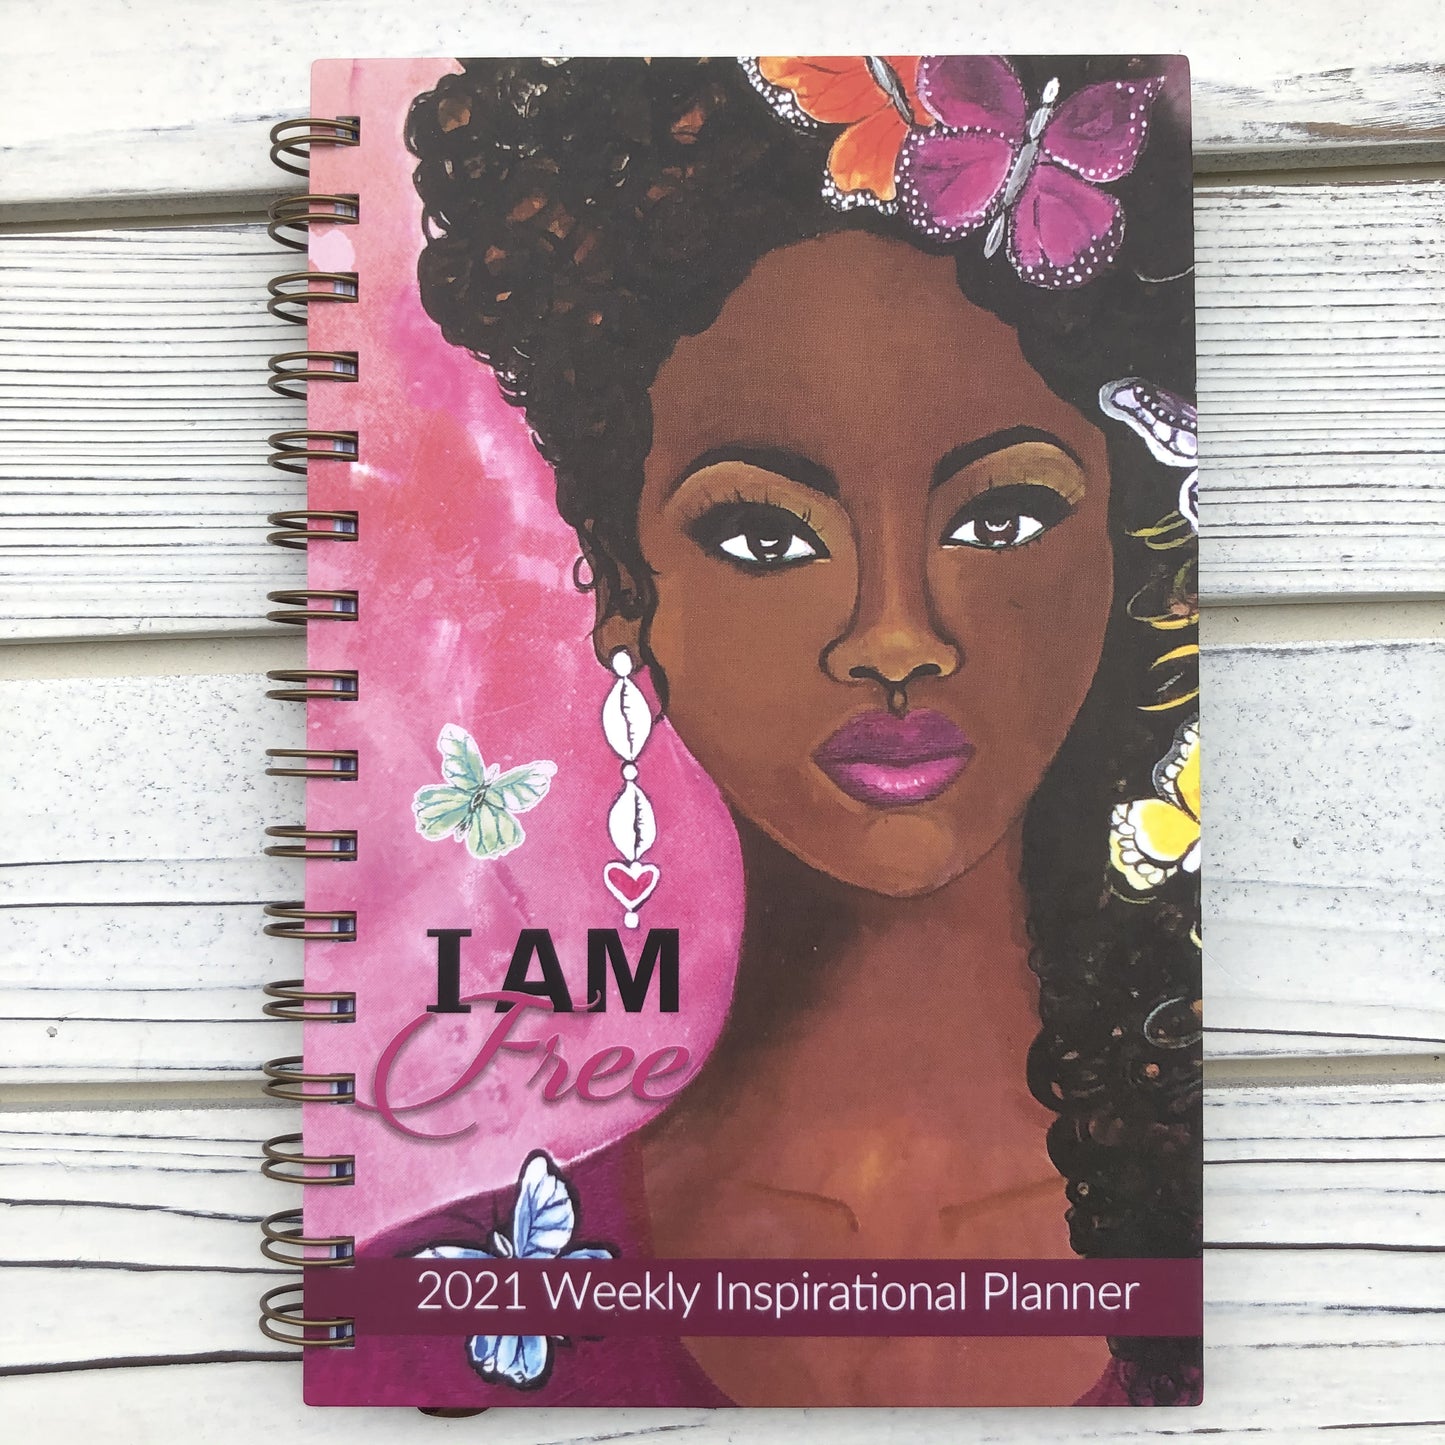 2021 "I AM FREE" 2021 Inspirational Weekly Planner by Sylvia “Gbaby” Cohen